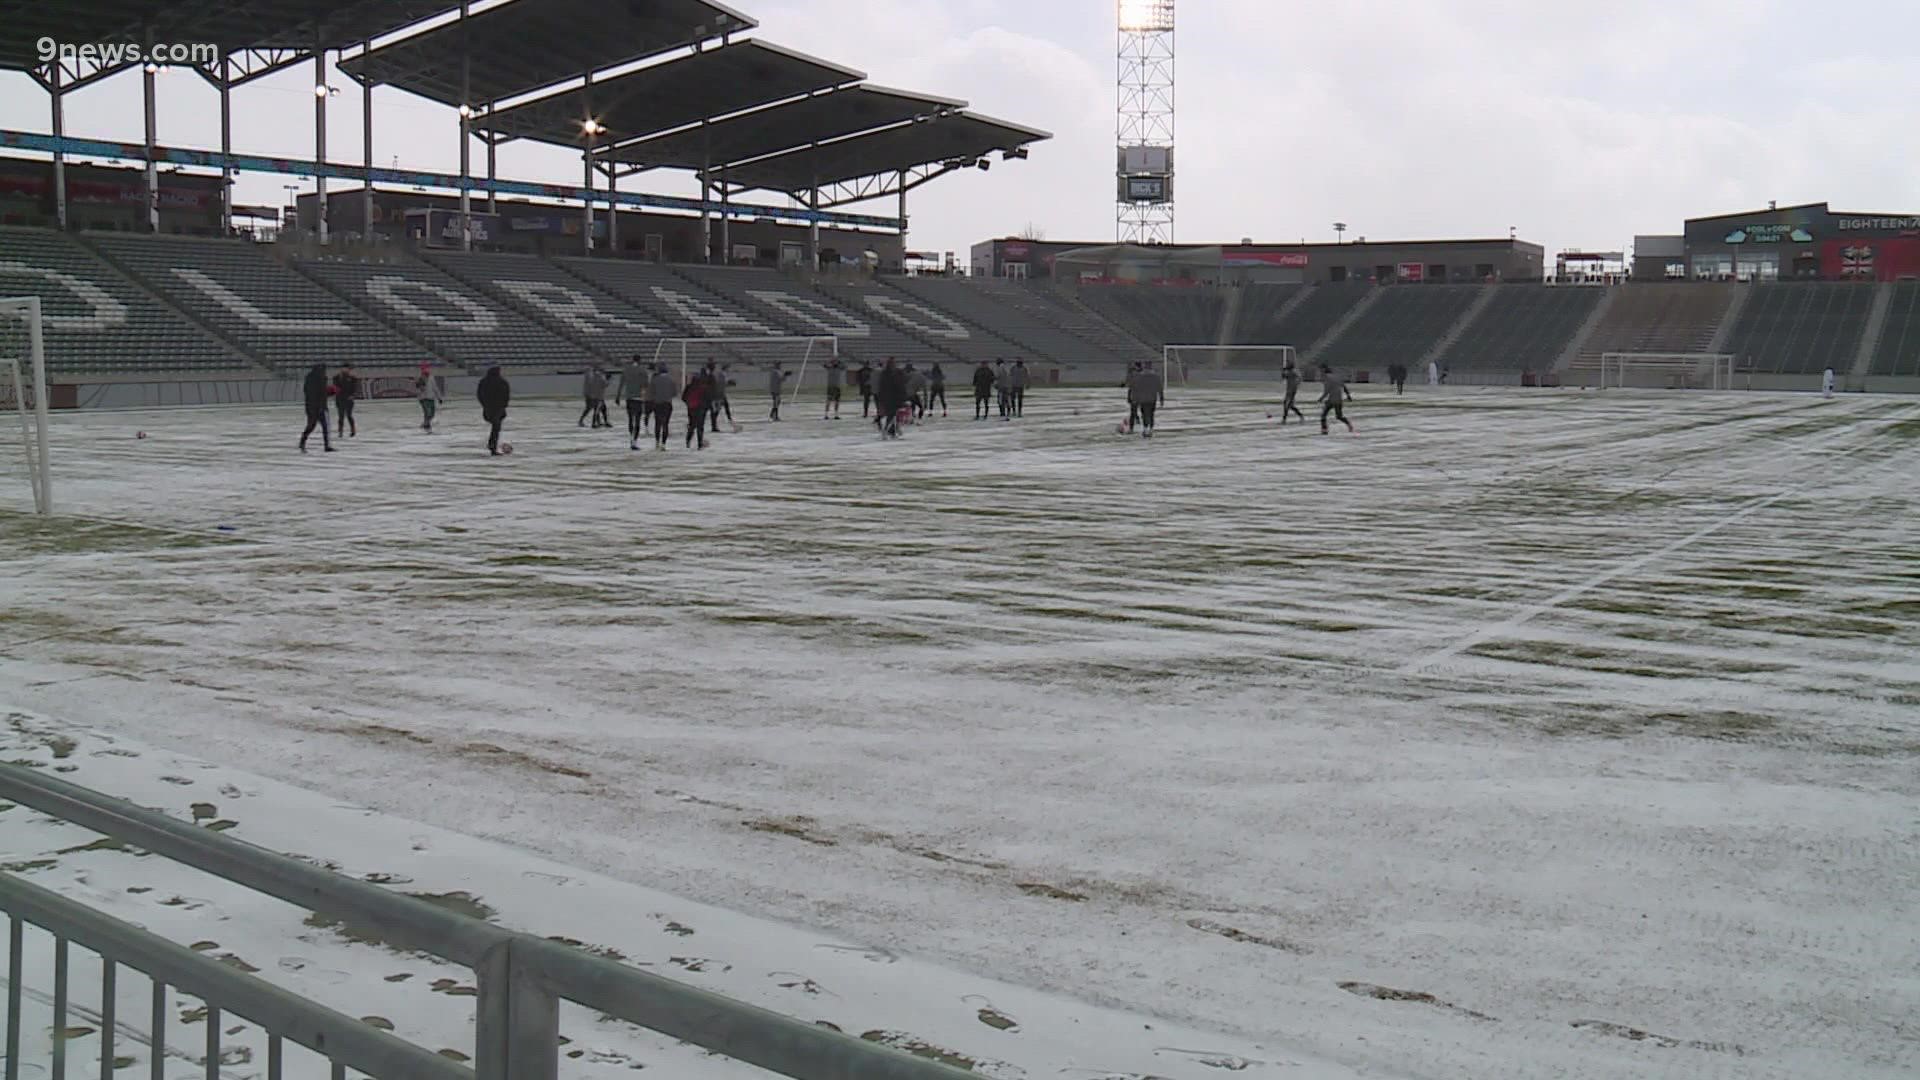 The Colorado Rapids are set to play one of the coldest matches at Dick's Sporting Goods Park on Wednesday.